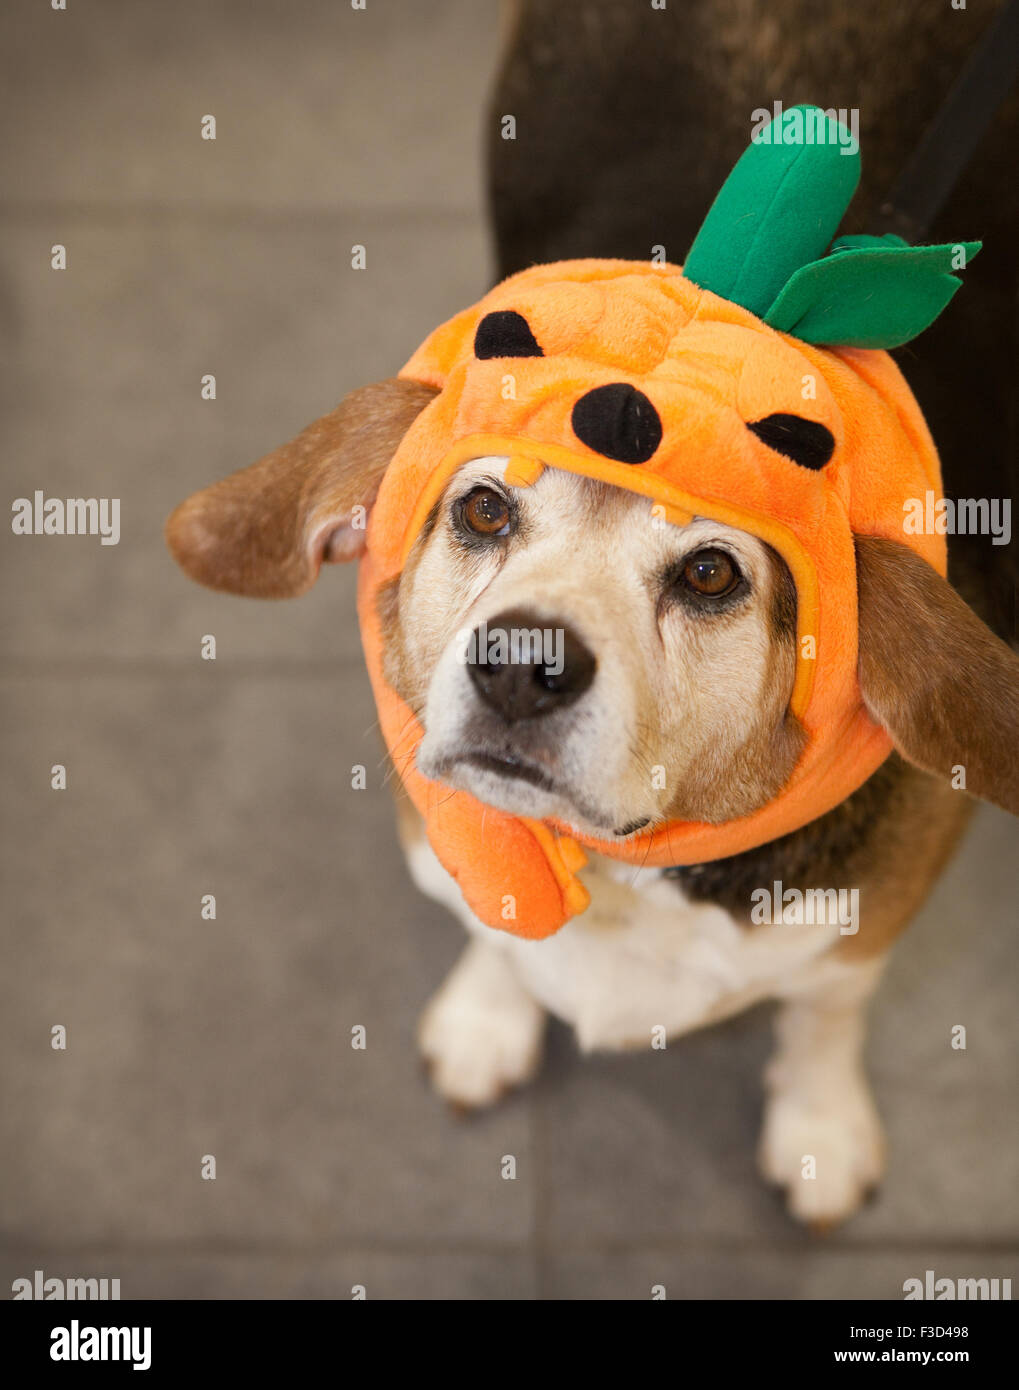 Elderly beagle dog wears Halloween costume of pumpkin on his head, looking  up at camera with his ears out Stock Photo - Alamy